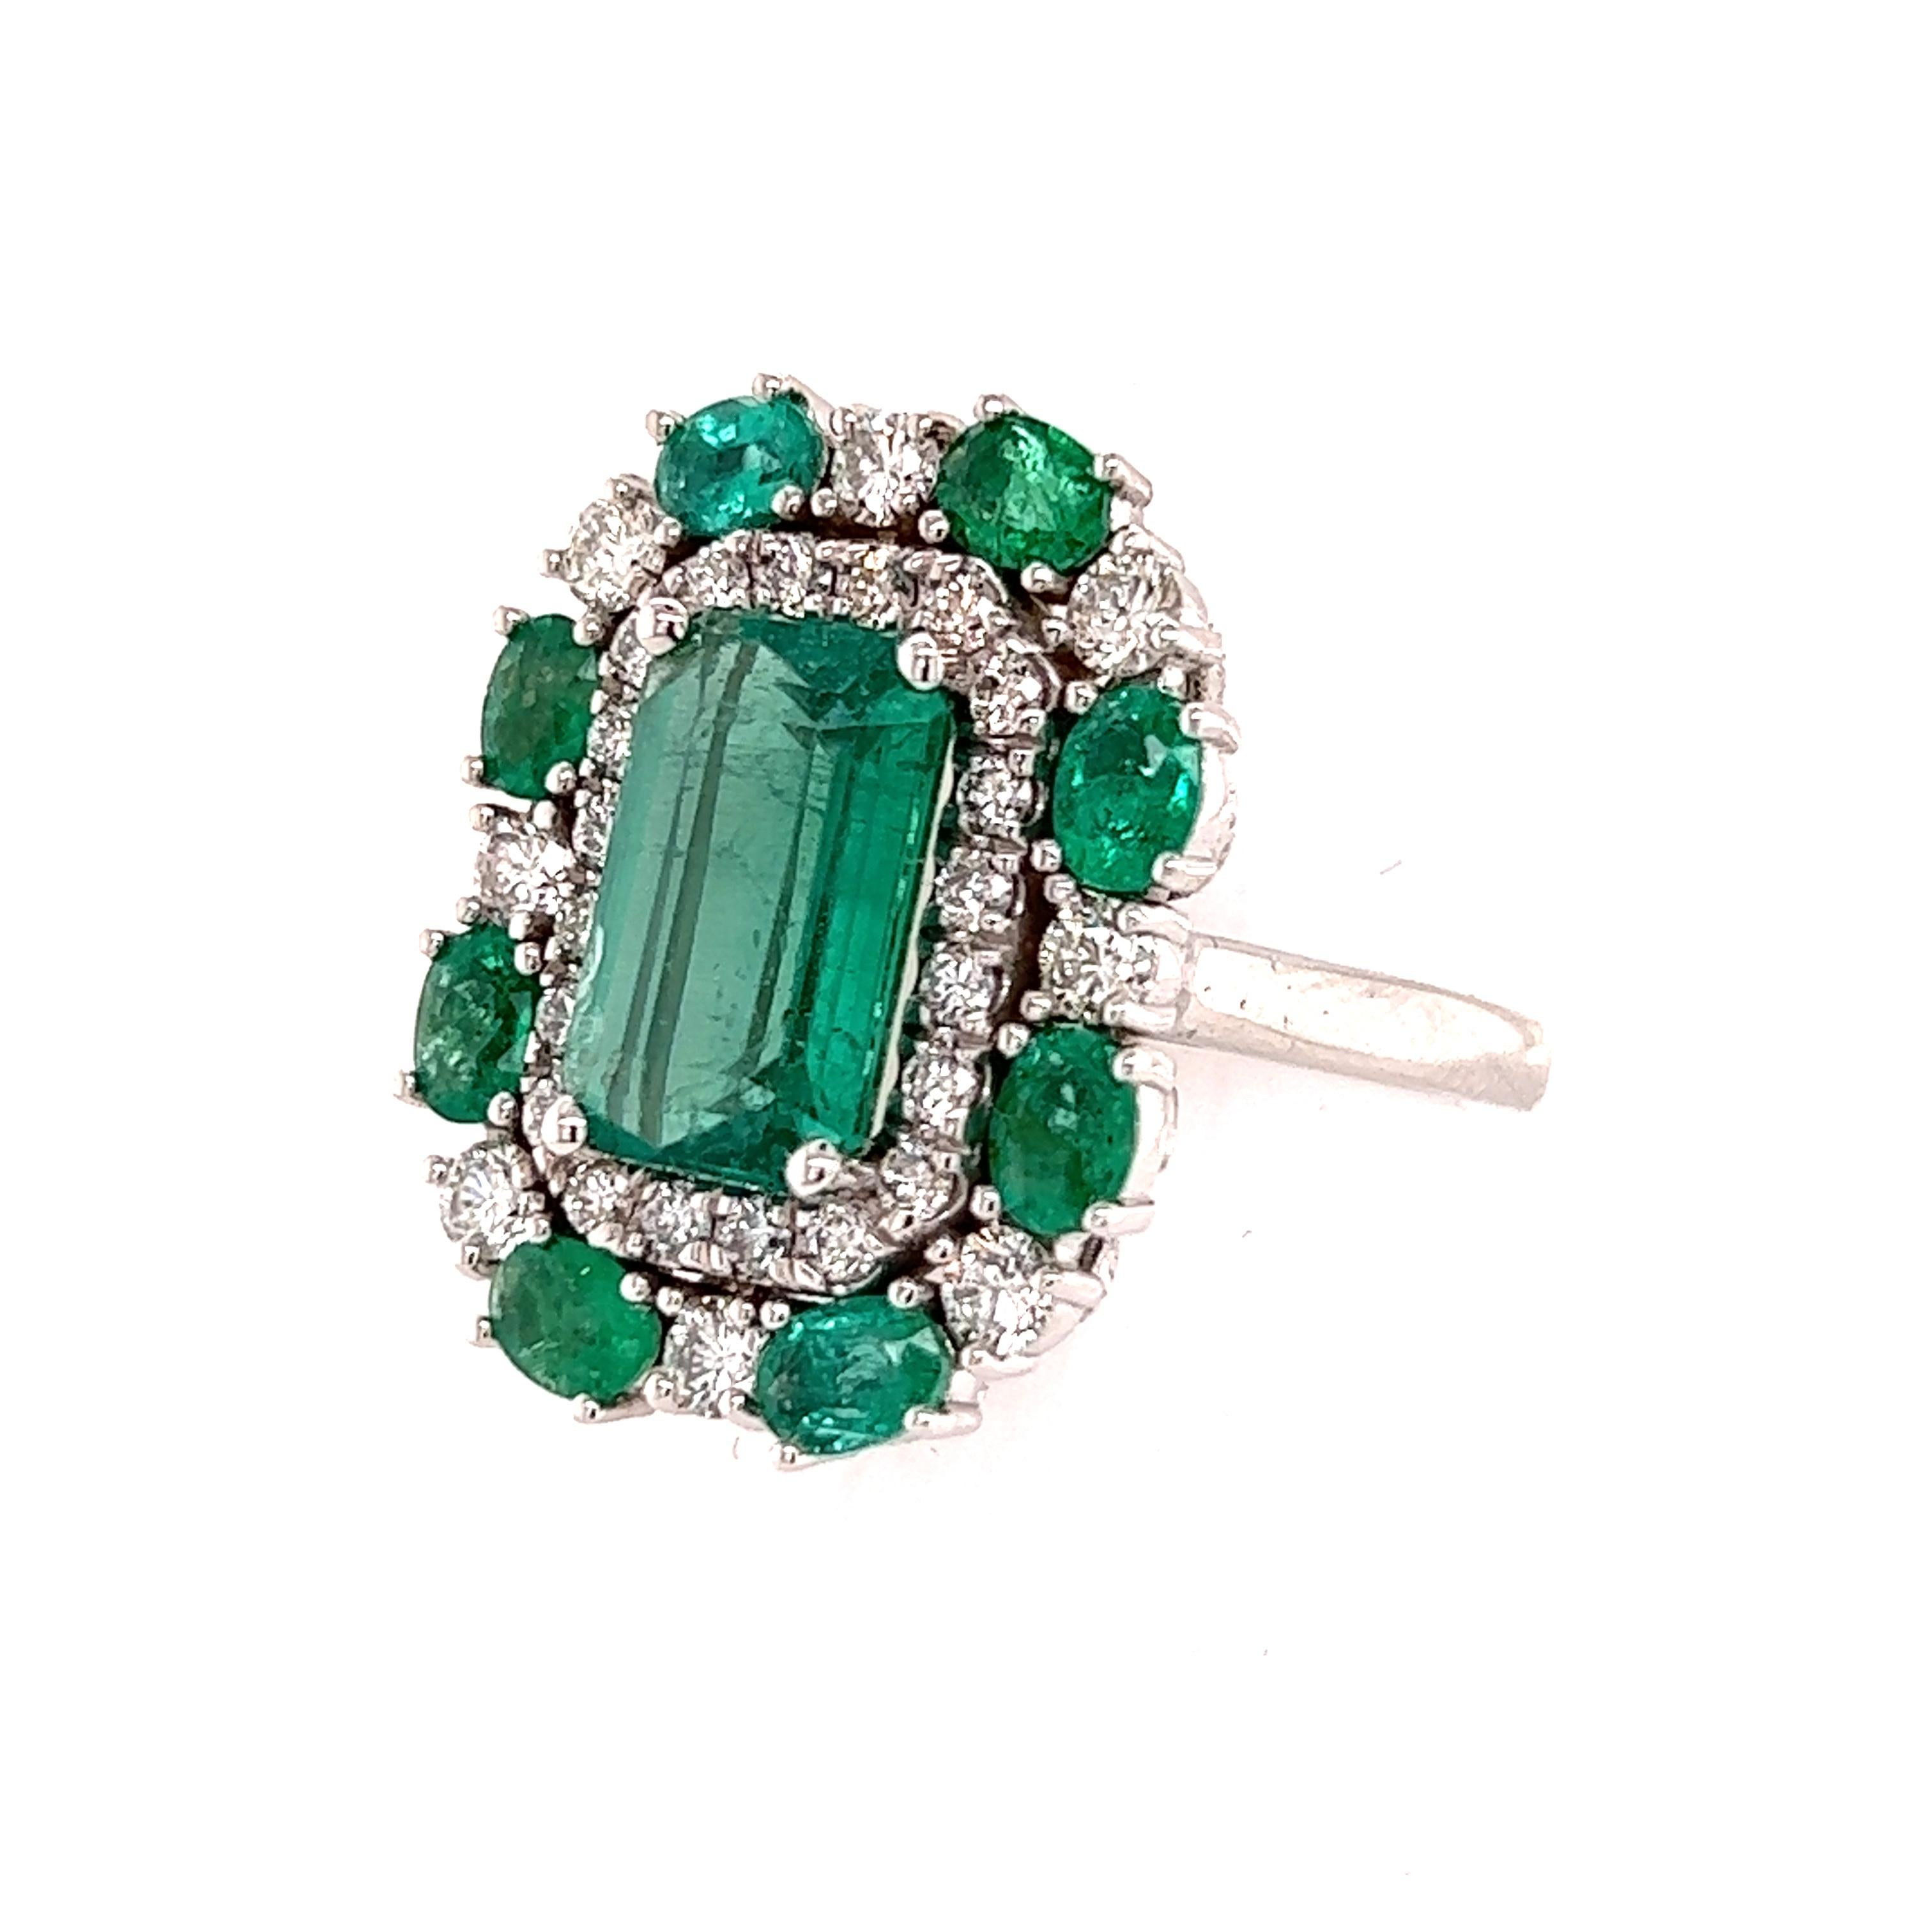 Natural Emerald Diamond Ring 6.5 14k Gold 4.52 TCW GIA Certified For Sale 1